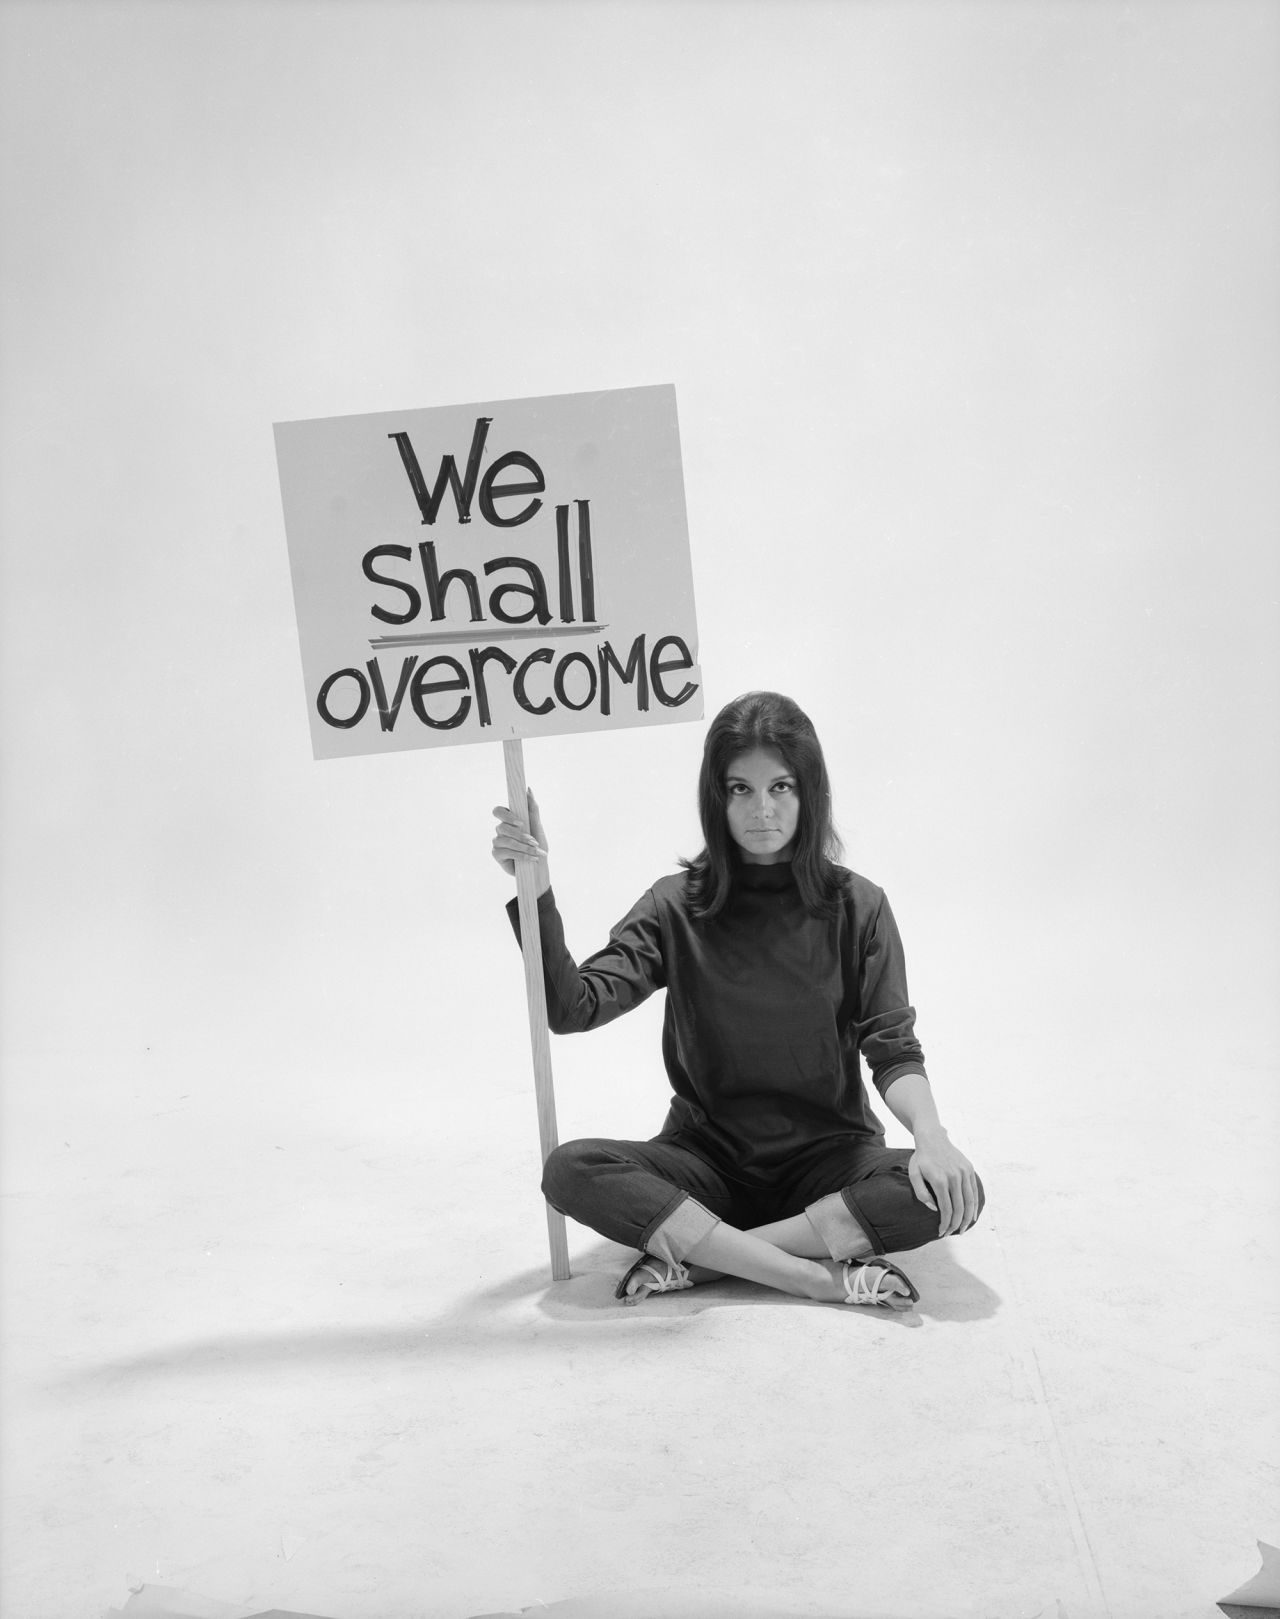 Writer and activist Gloria Steinem became one of the most outspoken female voices in America in the 1960s and 1970s. Steinem, along with fellow activist Betty Friedan and US Rep. Bella Abzug, fought for the passage of the Equal Rights Amendment — a constitutional amendment guaranteeing legal gender equality for all American citizens regardless of sex. "Feminism has never been about getting a job for one woman. It's about making life more fair for women everywhere," Steinem wrote in an <a href="https://www.latimes.com/la-oe-steinem4-2008sep04-story.html" target="_blank" target="_blank">op-ed for the Los Angeles Times.</a>